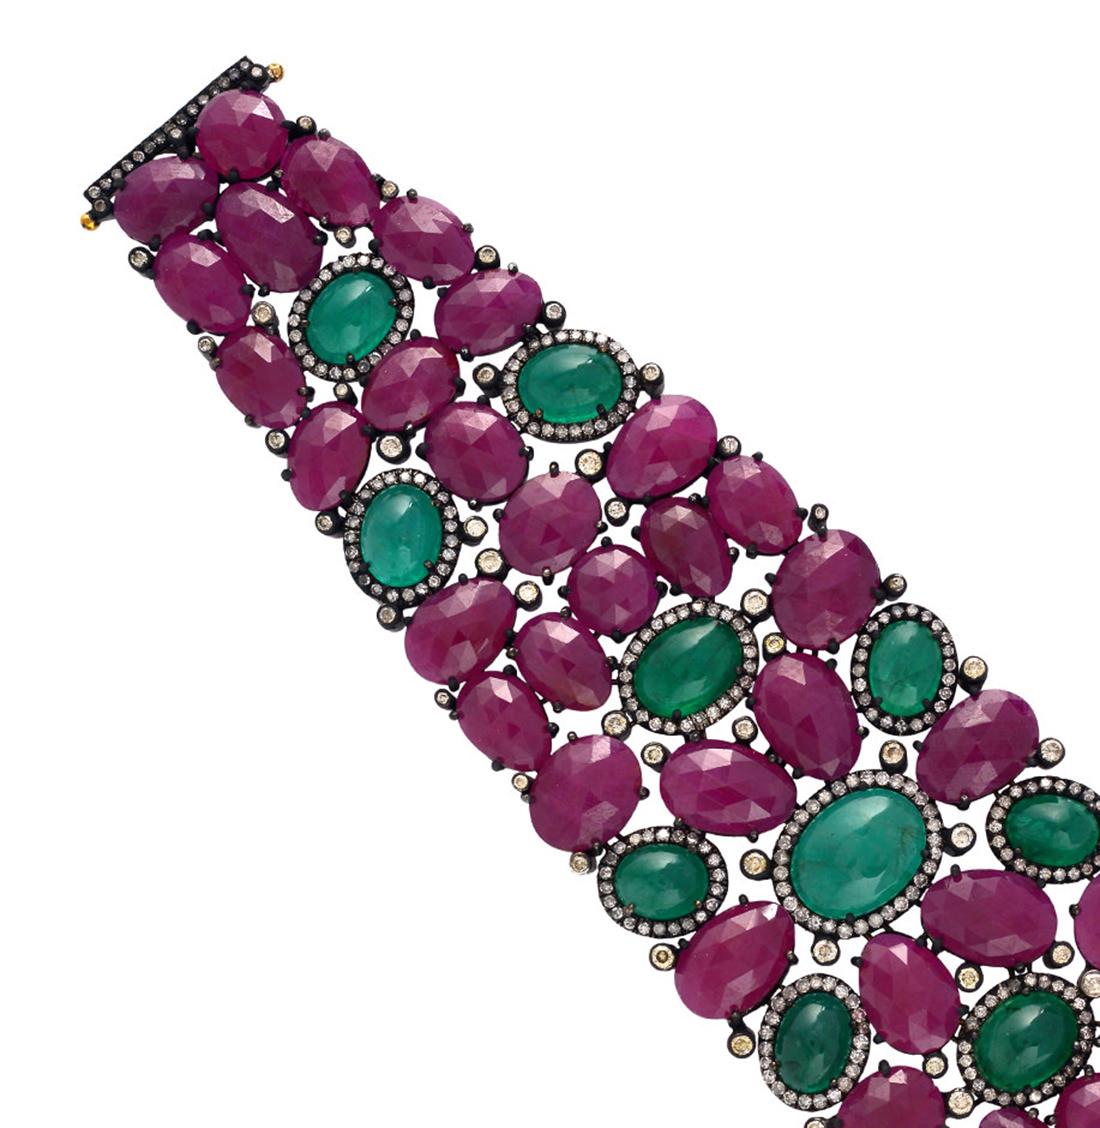 Baroque 139 Carats Natural Ruby Emerald & Diamond Bracelet 18k Gold & Silver For Sale 1